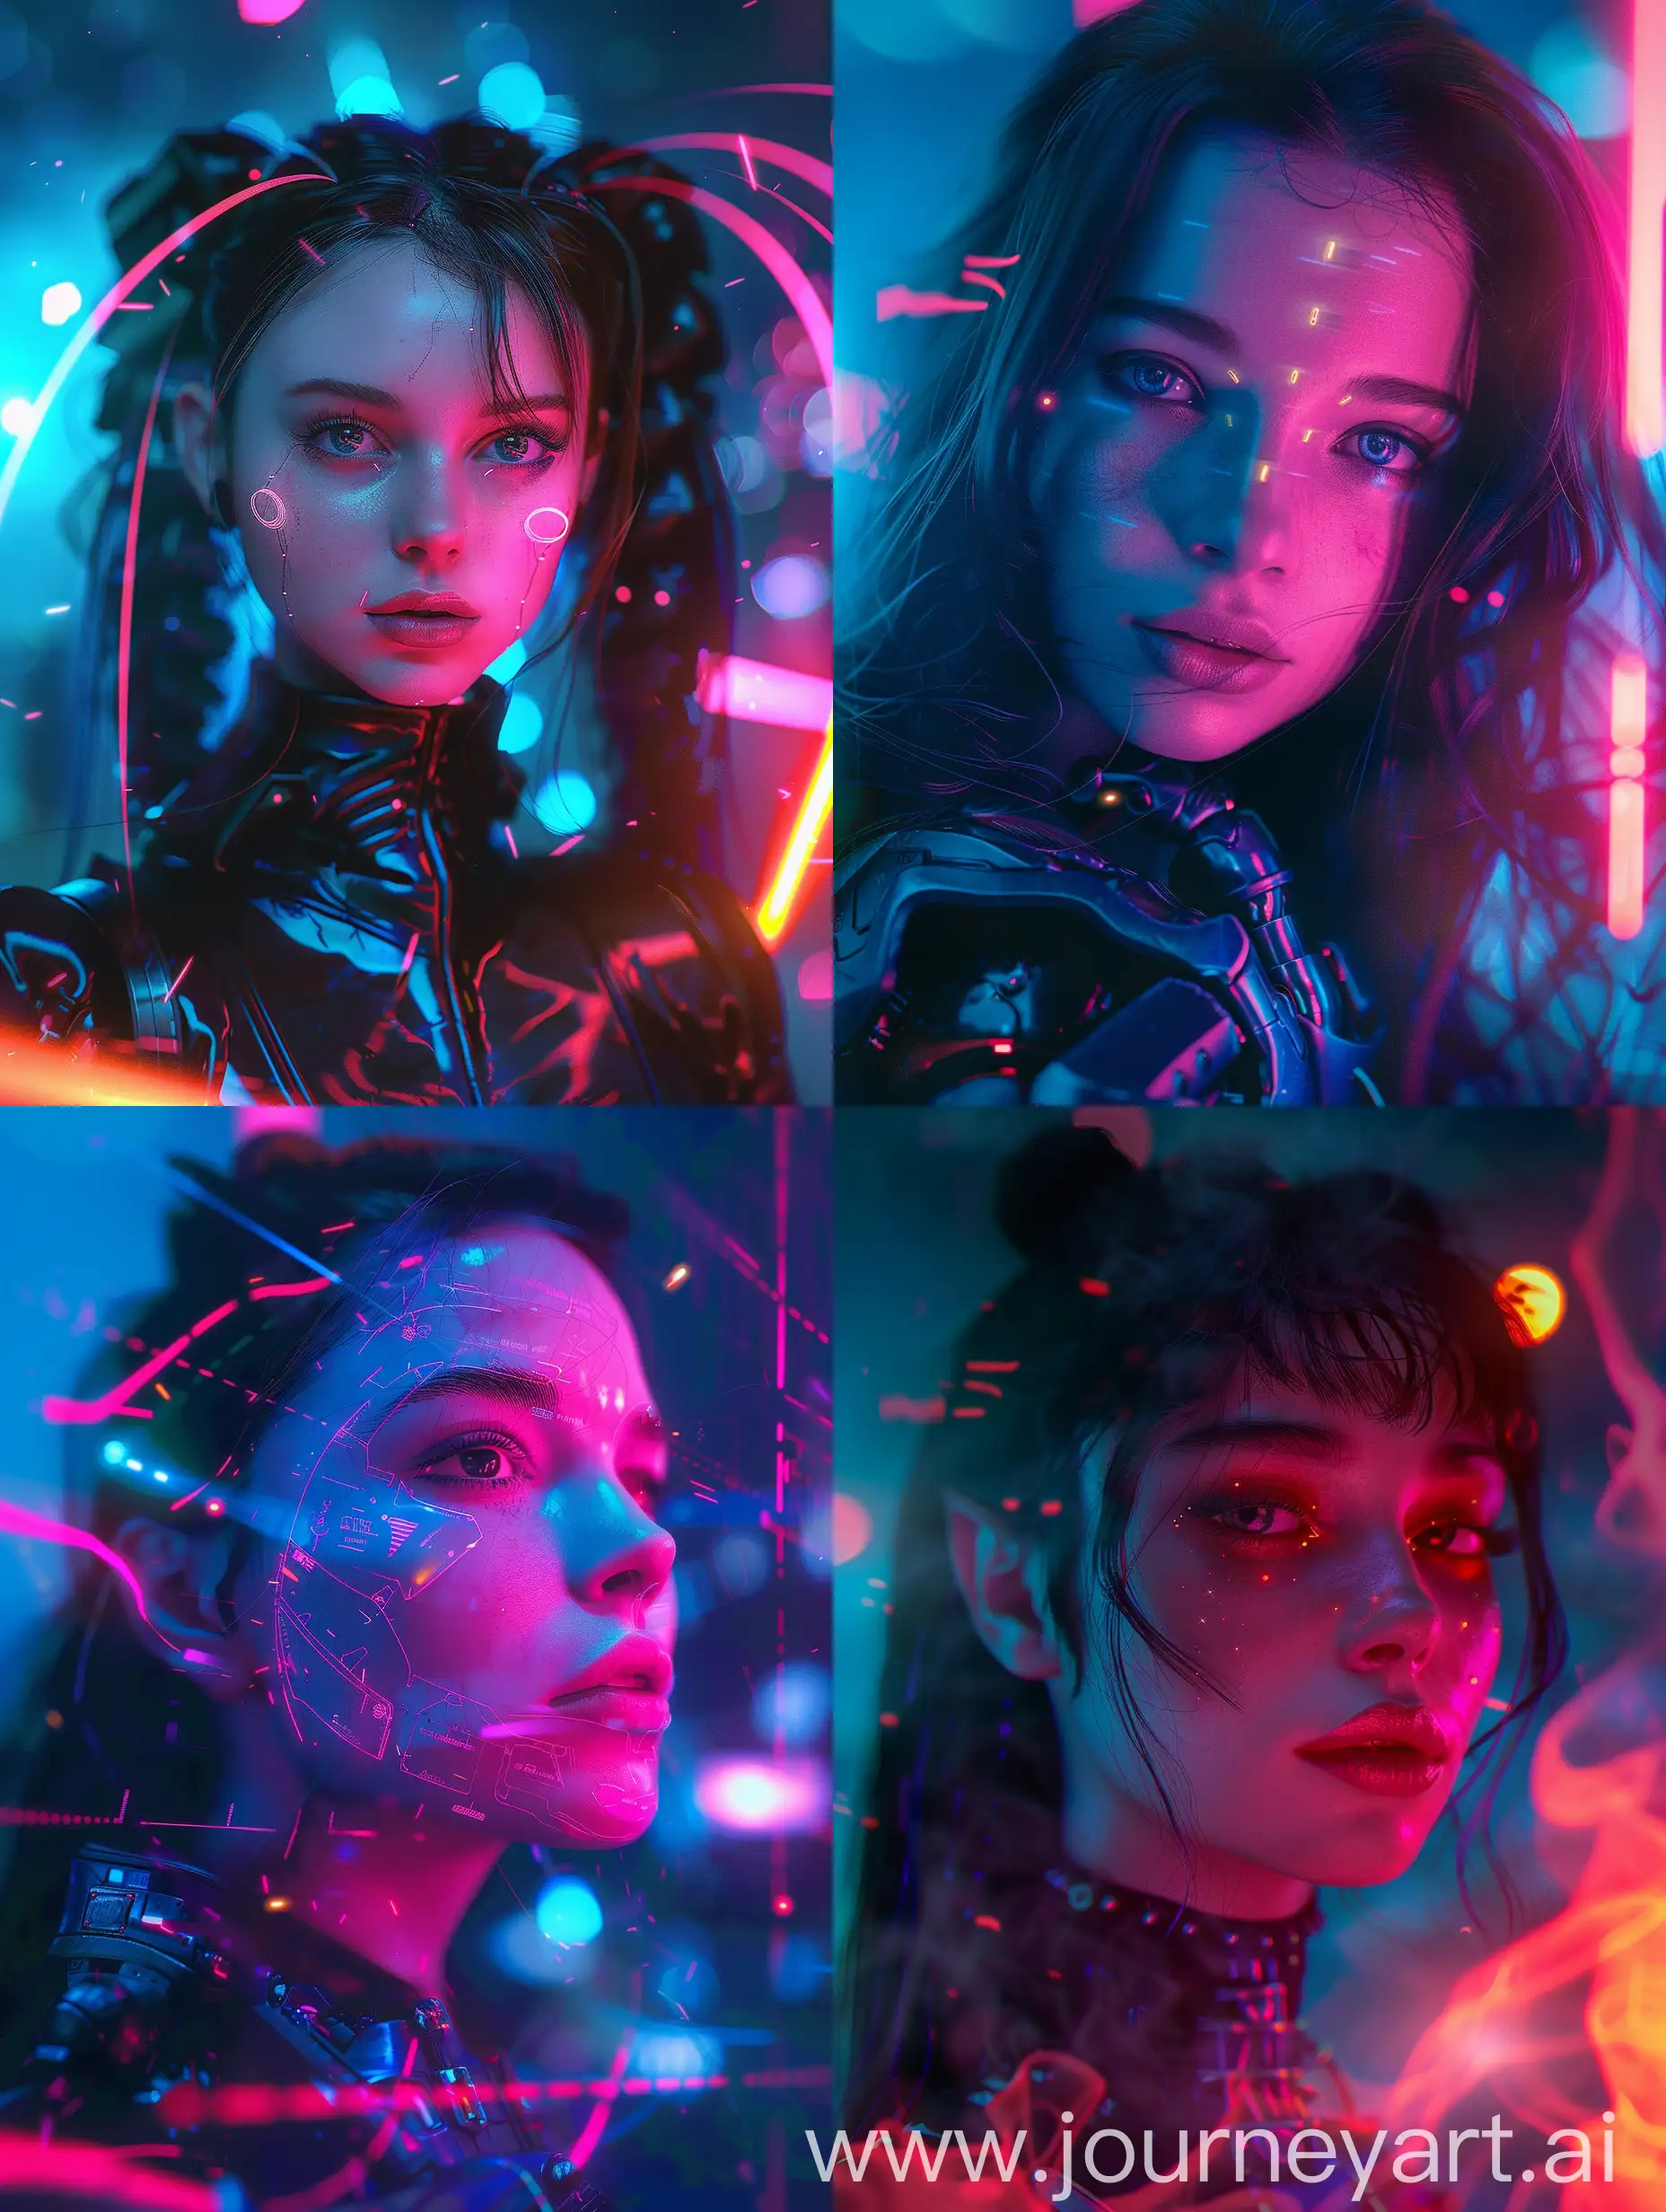 Cyber knight, darkness, potrait,  with subtle pink and blue gradients, realistic, 1girl, beautiful, high detail, attractive, fit, pretty face, cyberpunk fantasy, futuristic fairy psychedelic tale, robotic lasers fairy dancing rave in an neon incandescent flame, moonlight enveloping attire tech-punk mech-punk cityscape